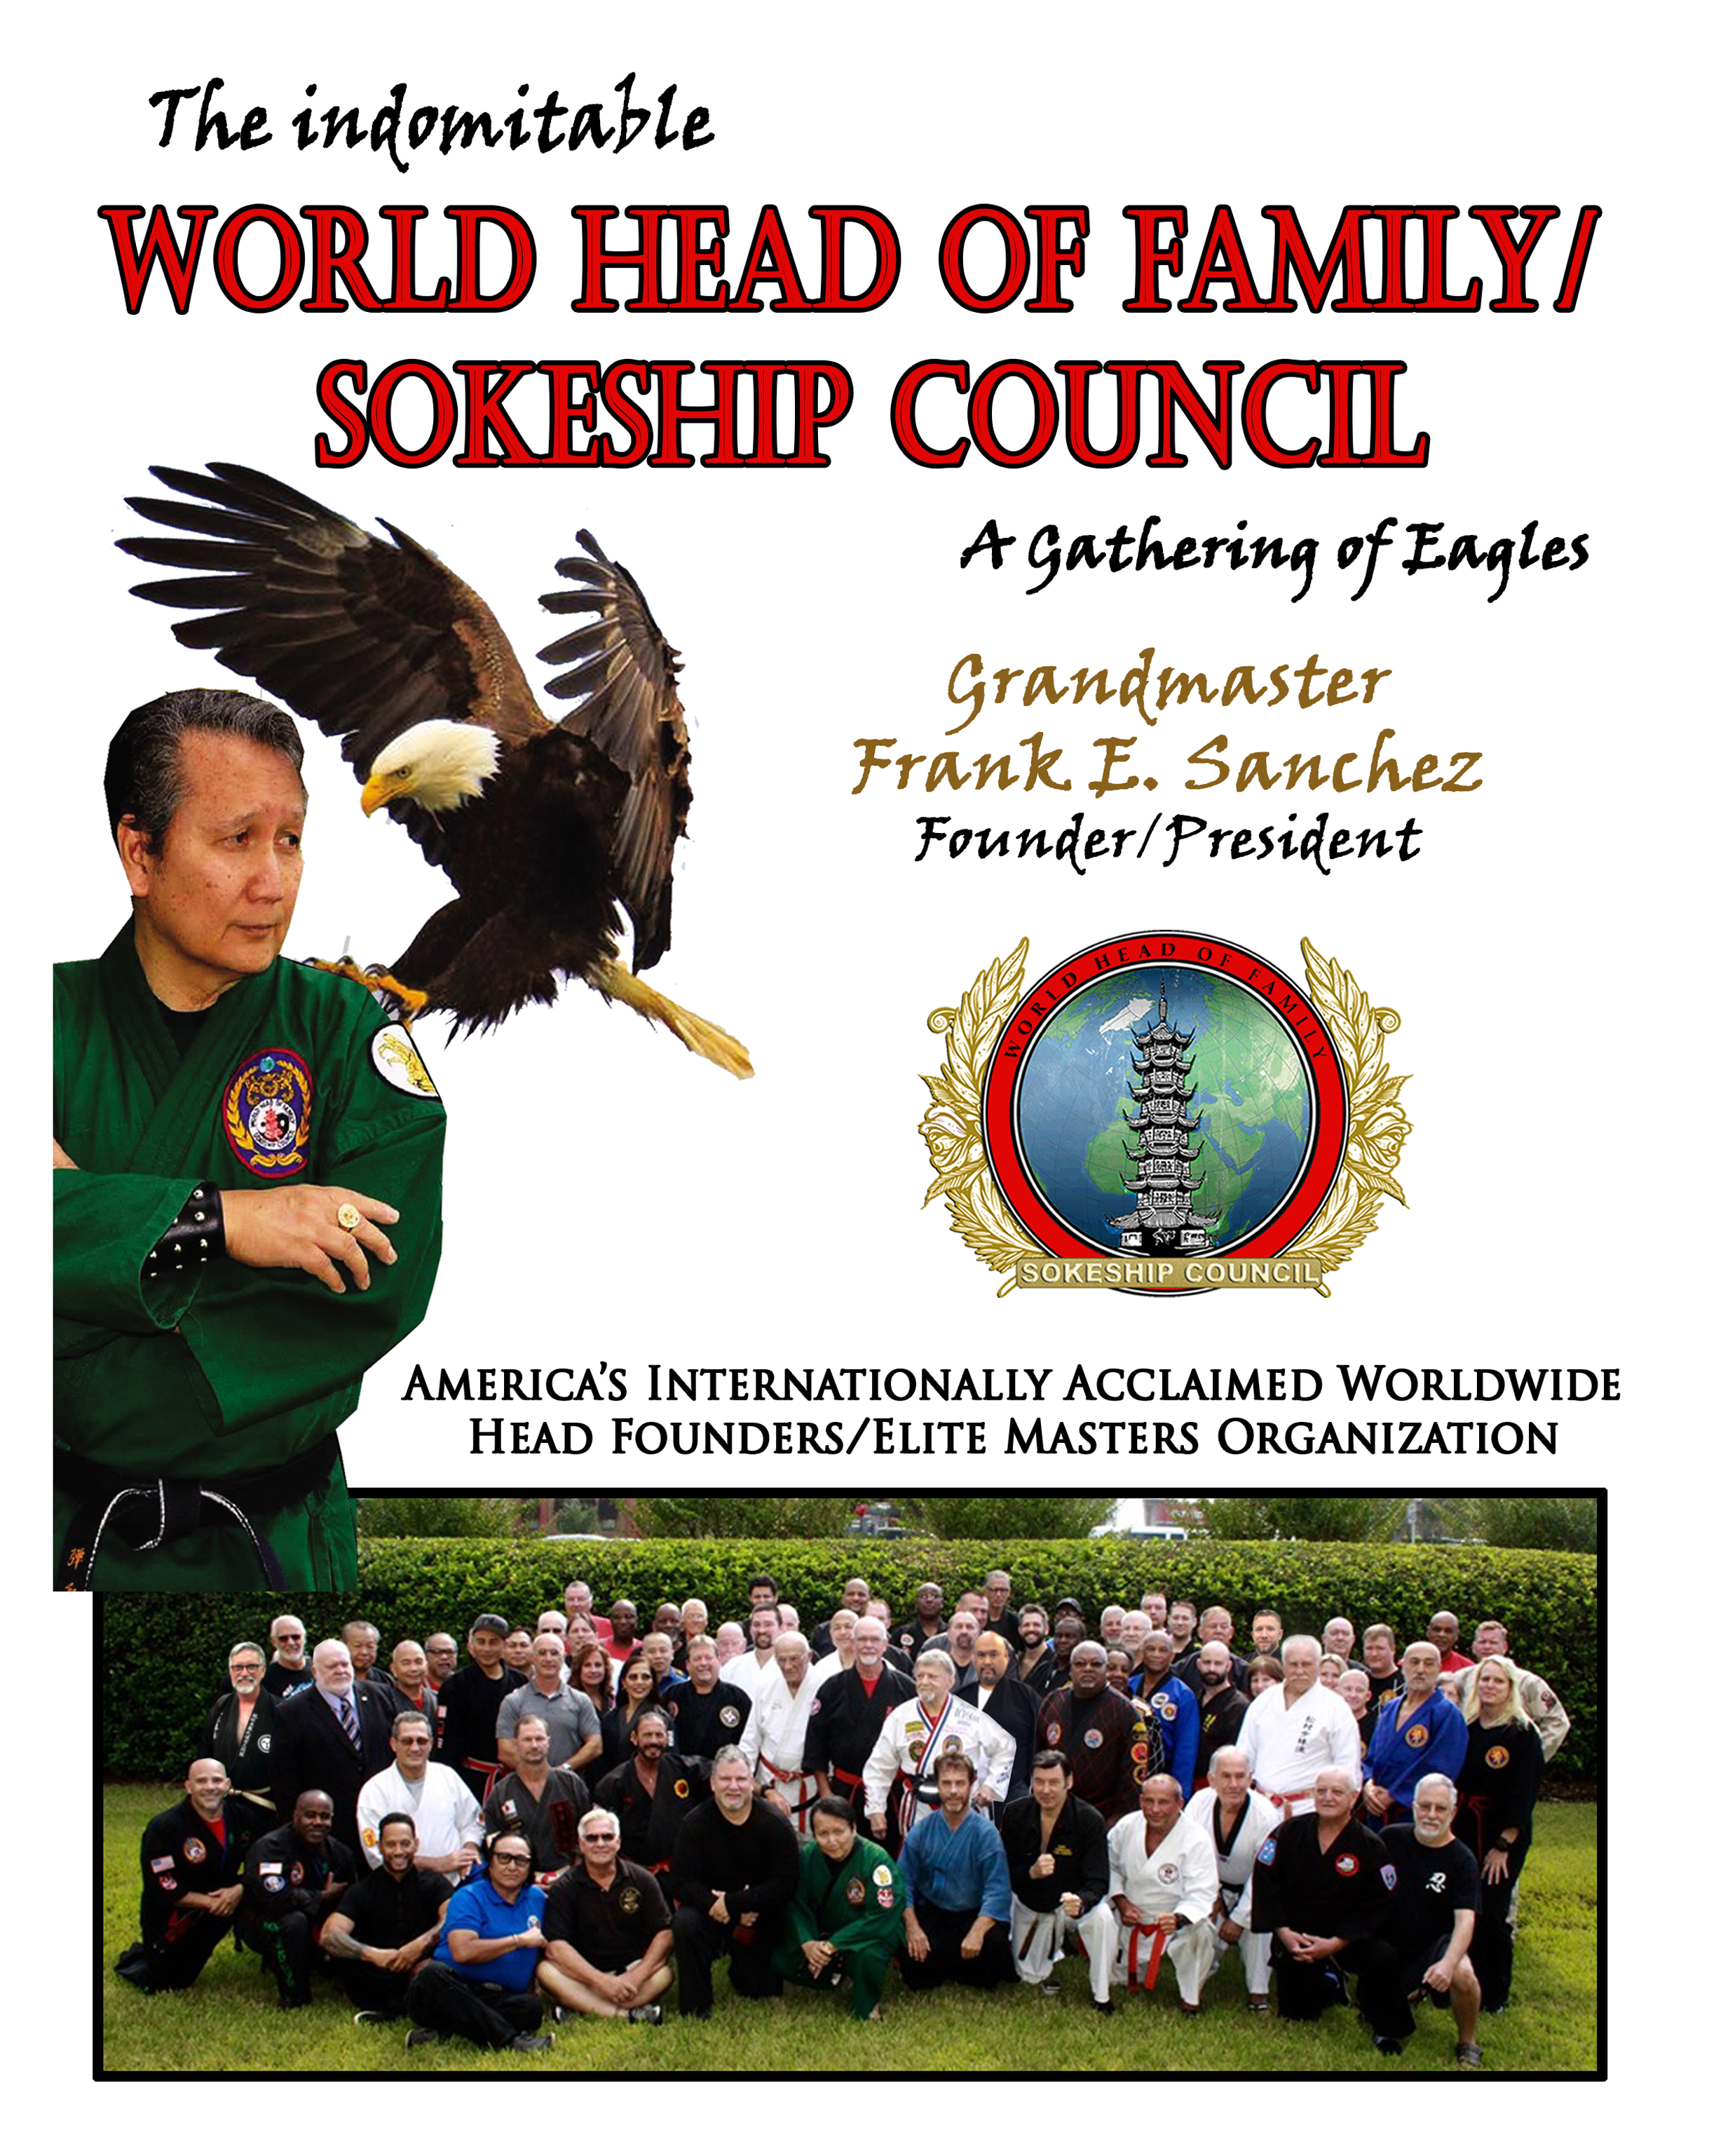 February 2021 book, “The Indomitable World Head of Family/ Sokeship Council: A Gathering of Eagles” by GM Frank E. Sanchez/ GGM Jim Arvanitis – covers the history of its founder  & the WHFSC with a complete listing of WHFSC membership  from its inception in 1992 to 2020 including testimonials, little known facts, etc. – Available on Amazon.com